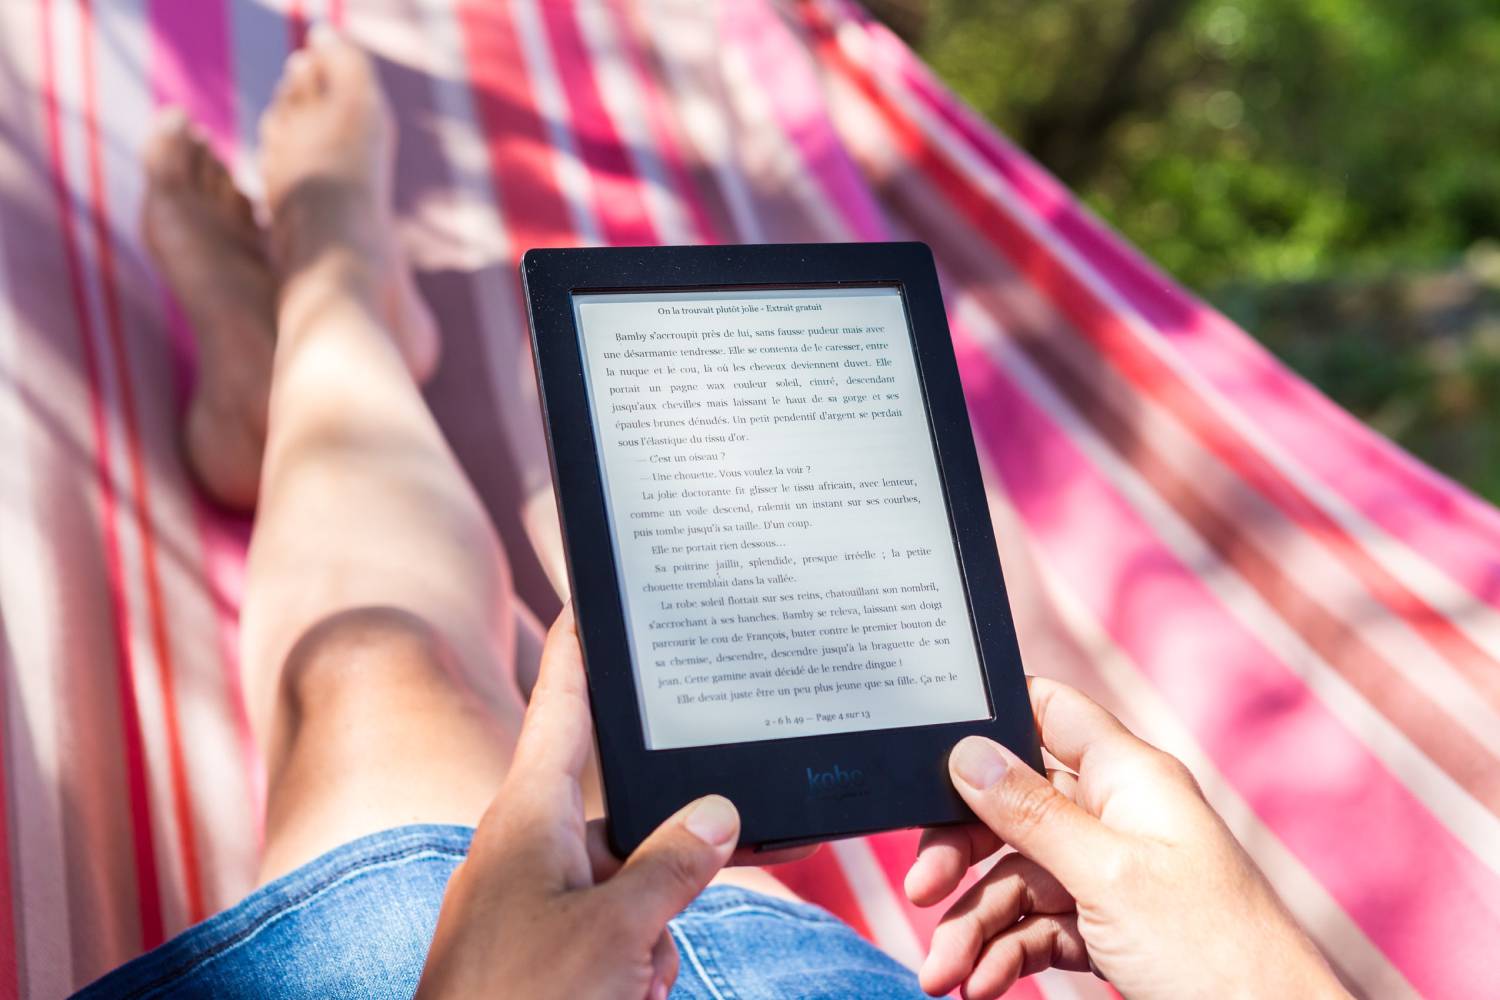 The best e-reader for you is one of two excellent options